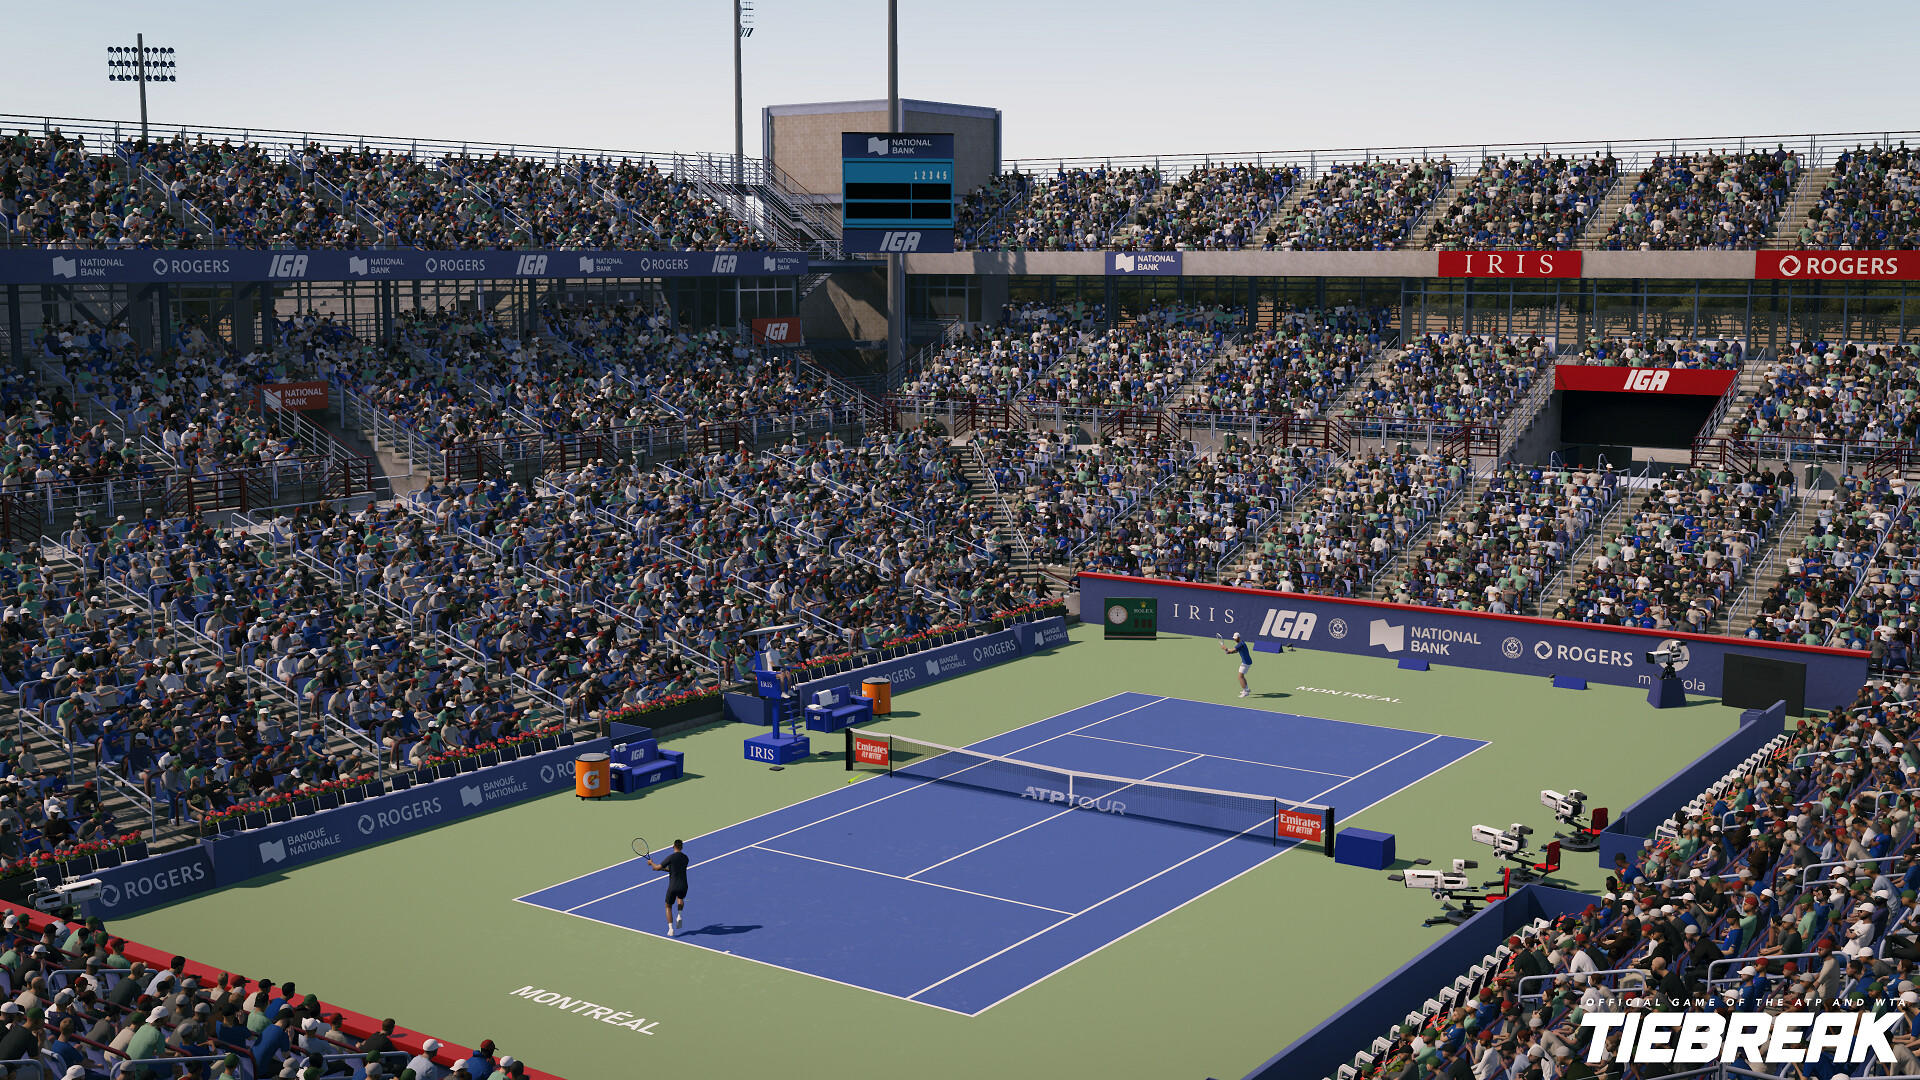 TIEBREAK: Official game of the ATP and WTA 게임 스크린 샷